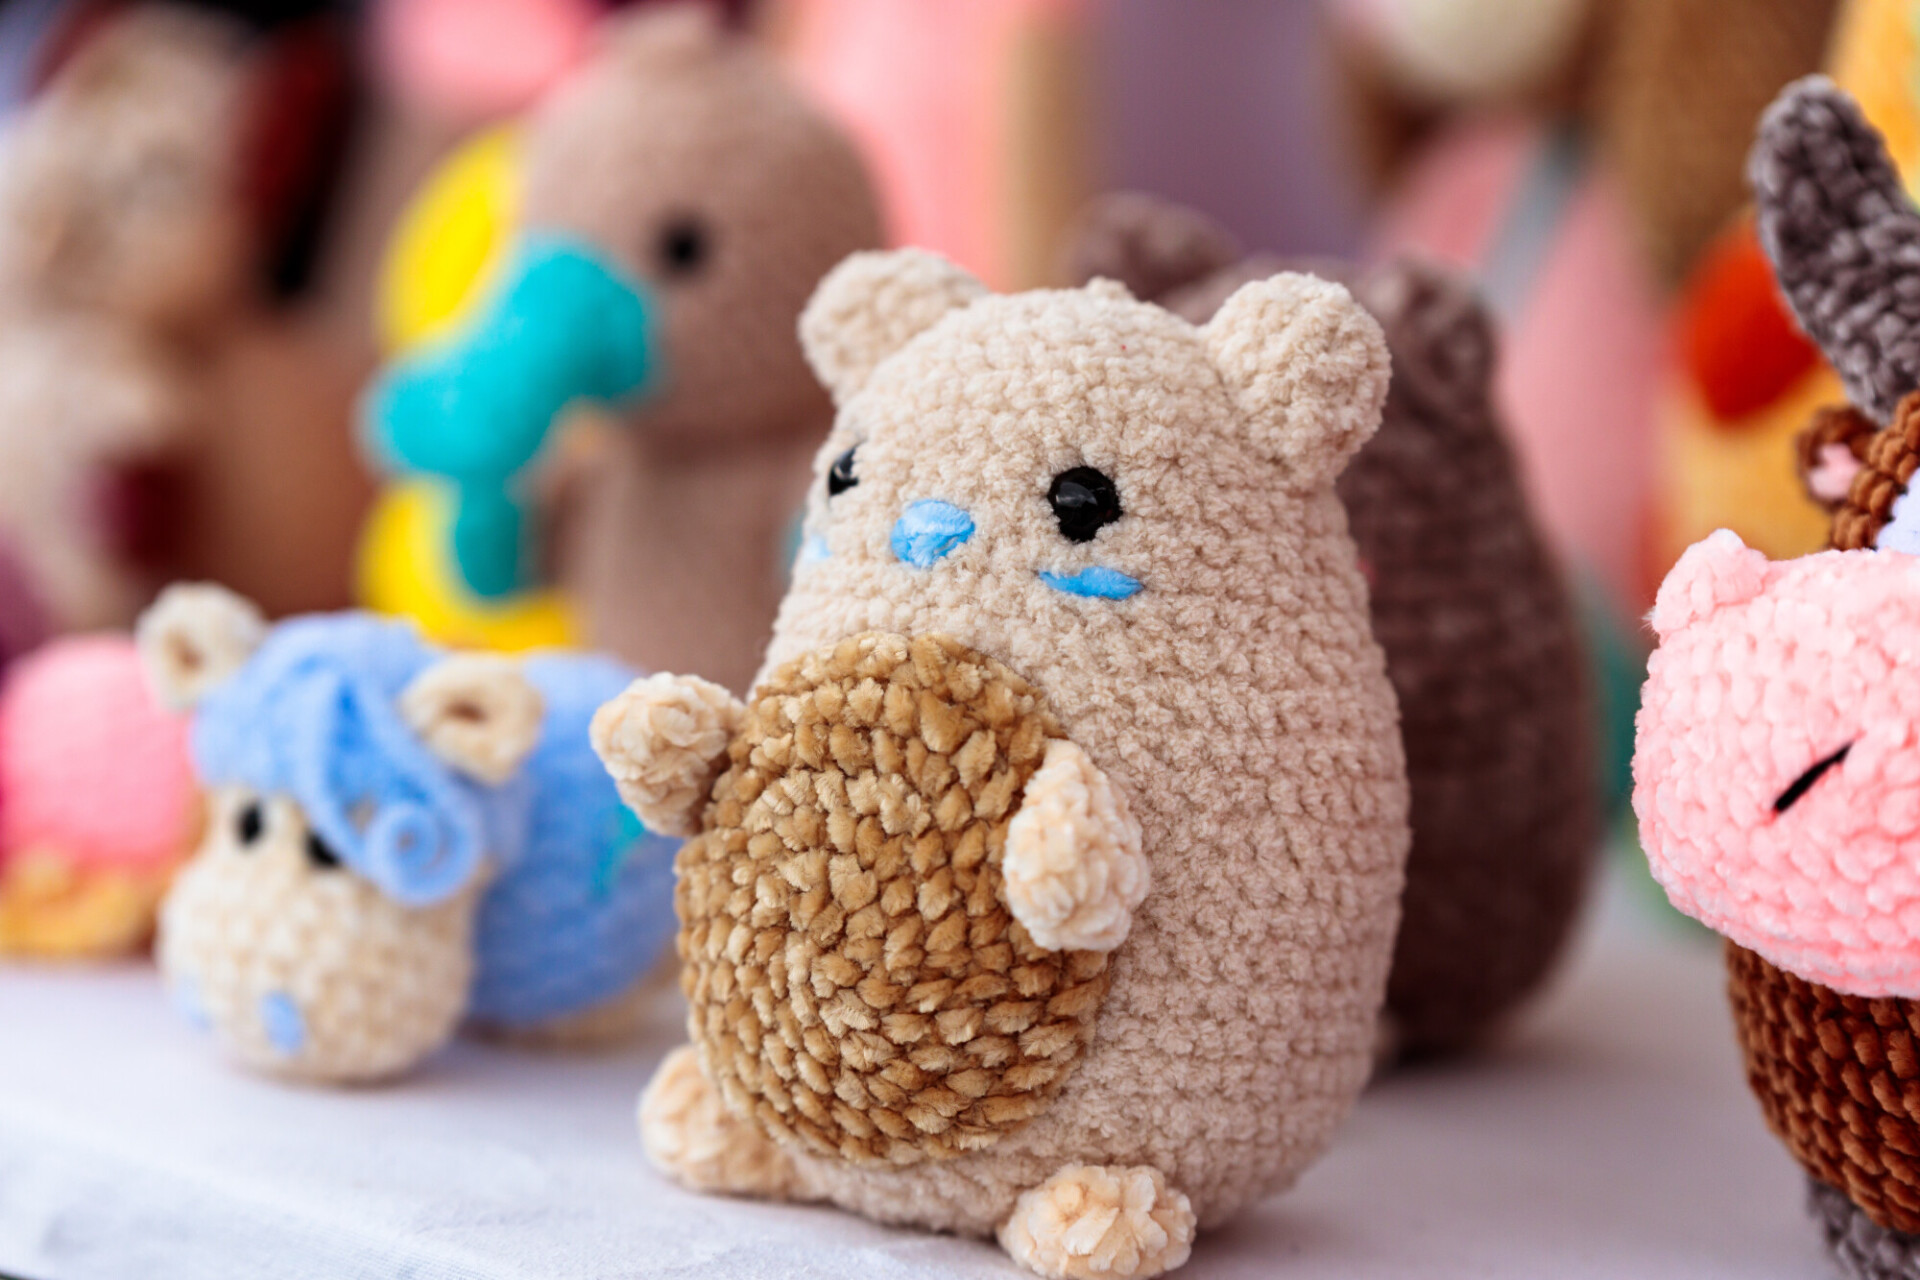 Adorable Handcrafted Delight: Crocheted Hamster at a Handmade Market